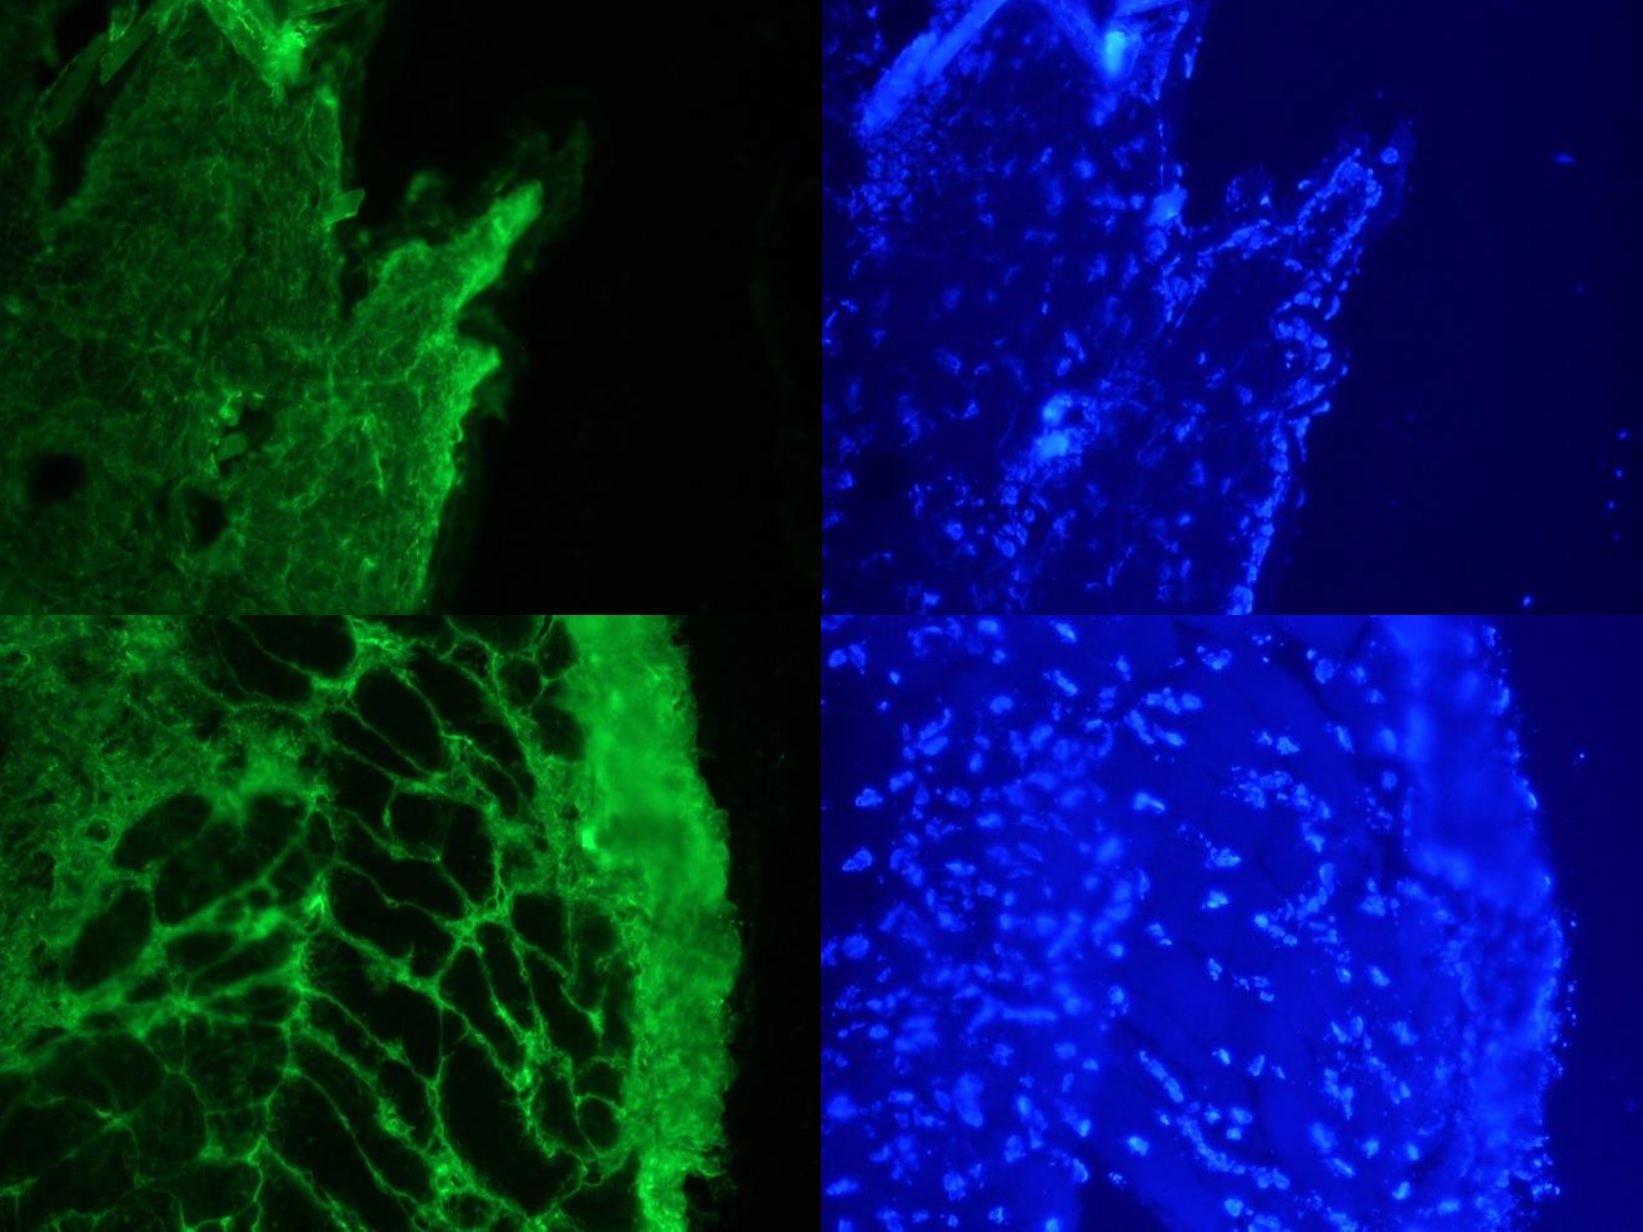 Figure 1. Images on the left: Specific indirect immunostaining of connective tissue in frozen sections of mouse skin with FI24951 (diluted 1:1000) Images on the right: Corresponding DAPI staining of nuclei in epidermis, muscle and connective tissue.